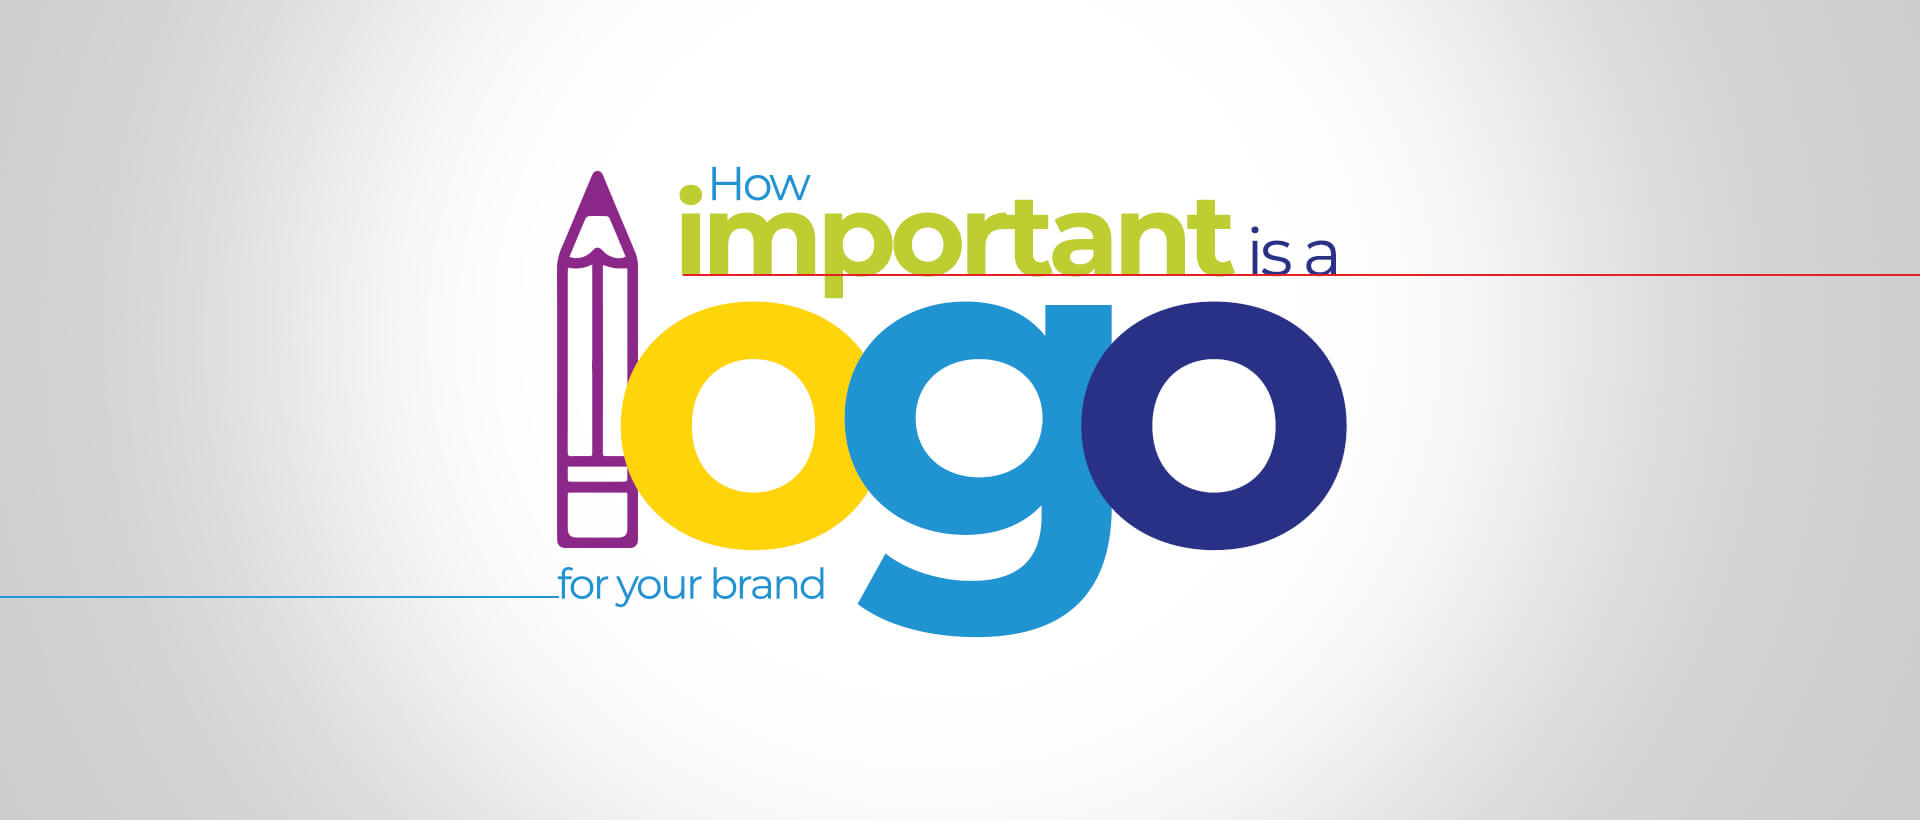 How important is a logo for your brand